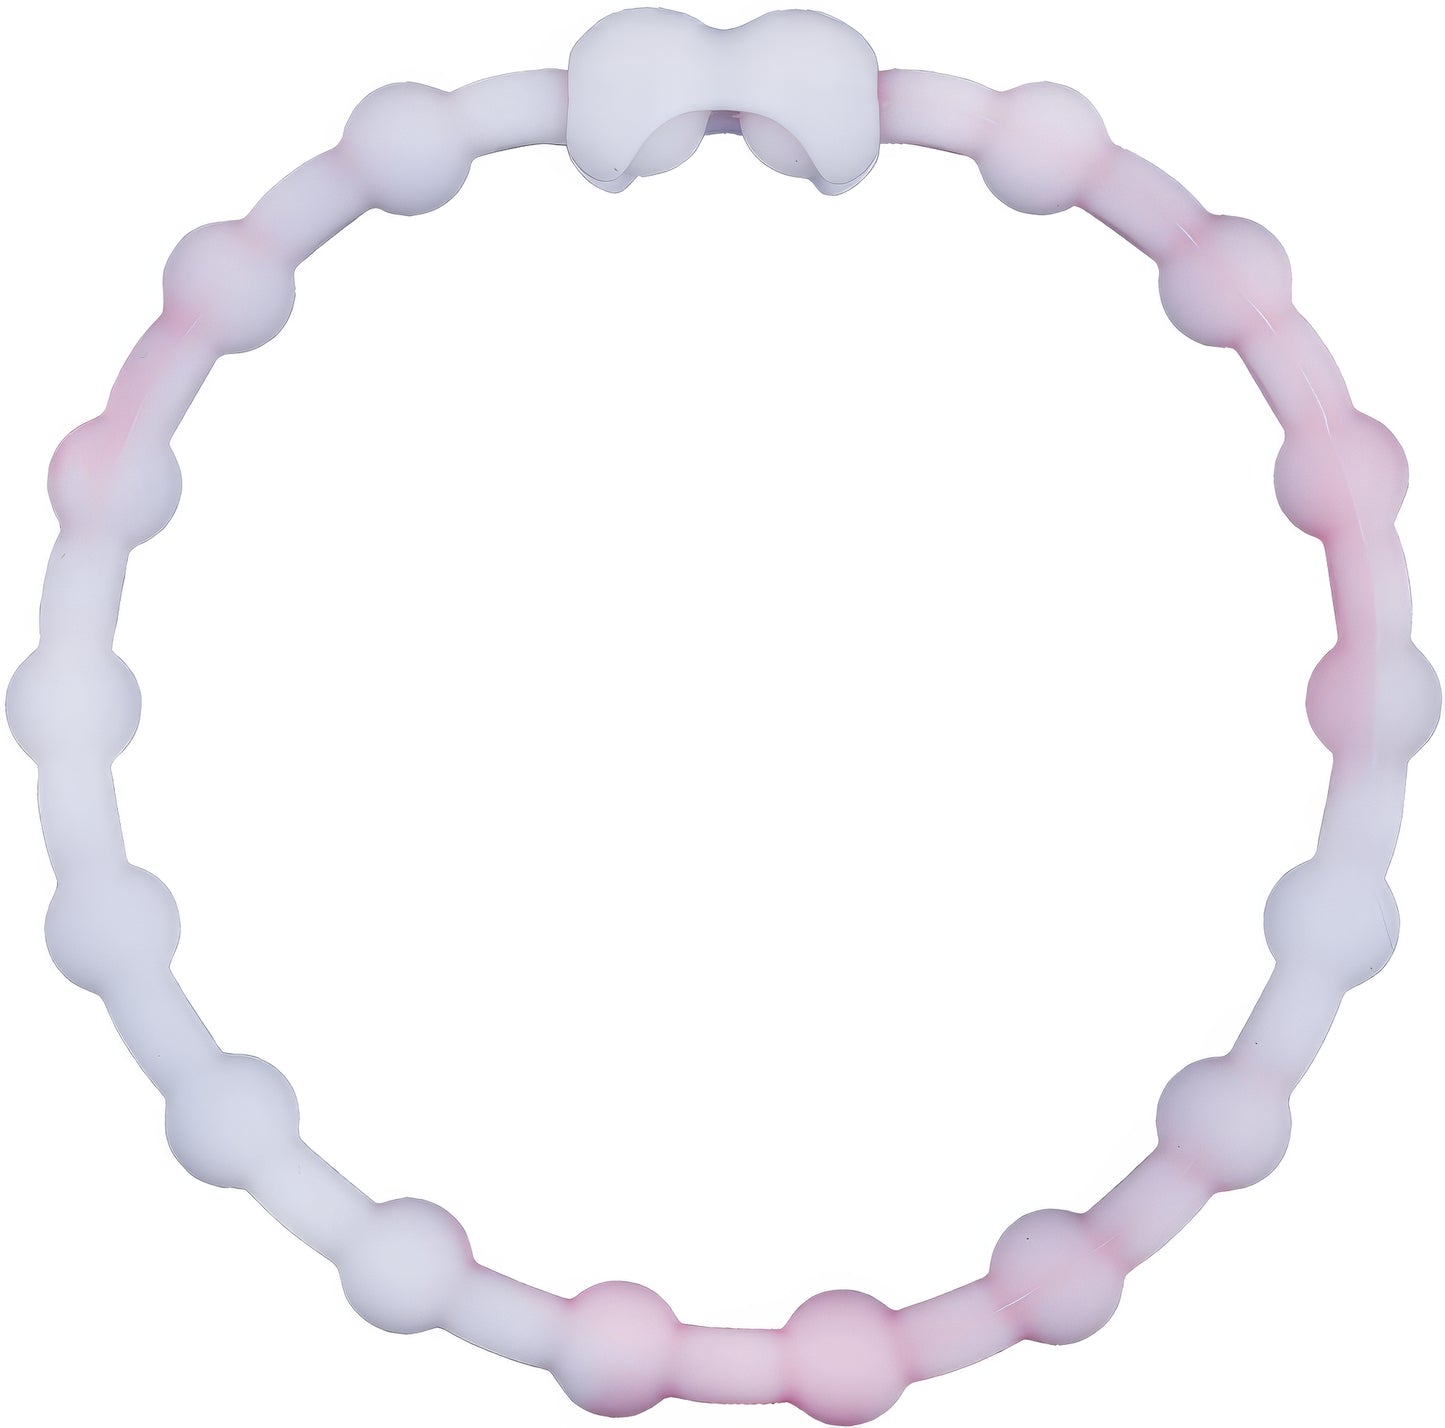 Cloudy Pink Hair Ties (6-Pack): Soft Touch of Whimsy for Your Hair